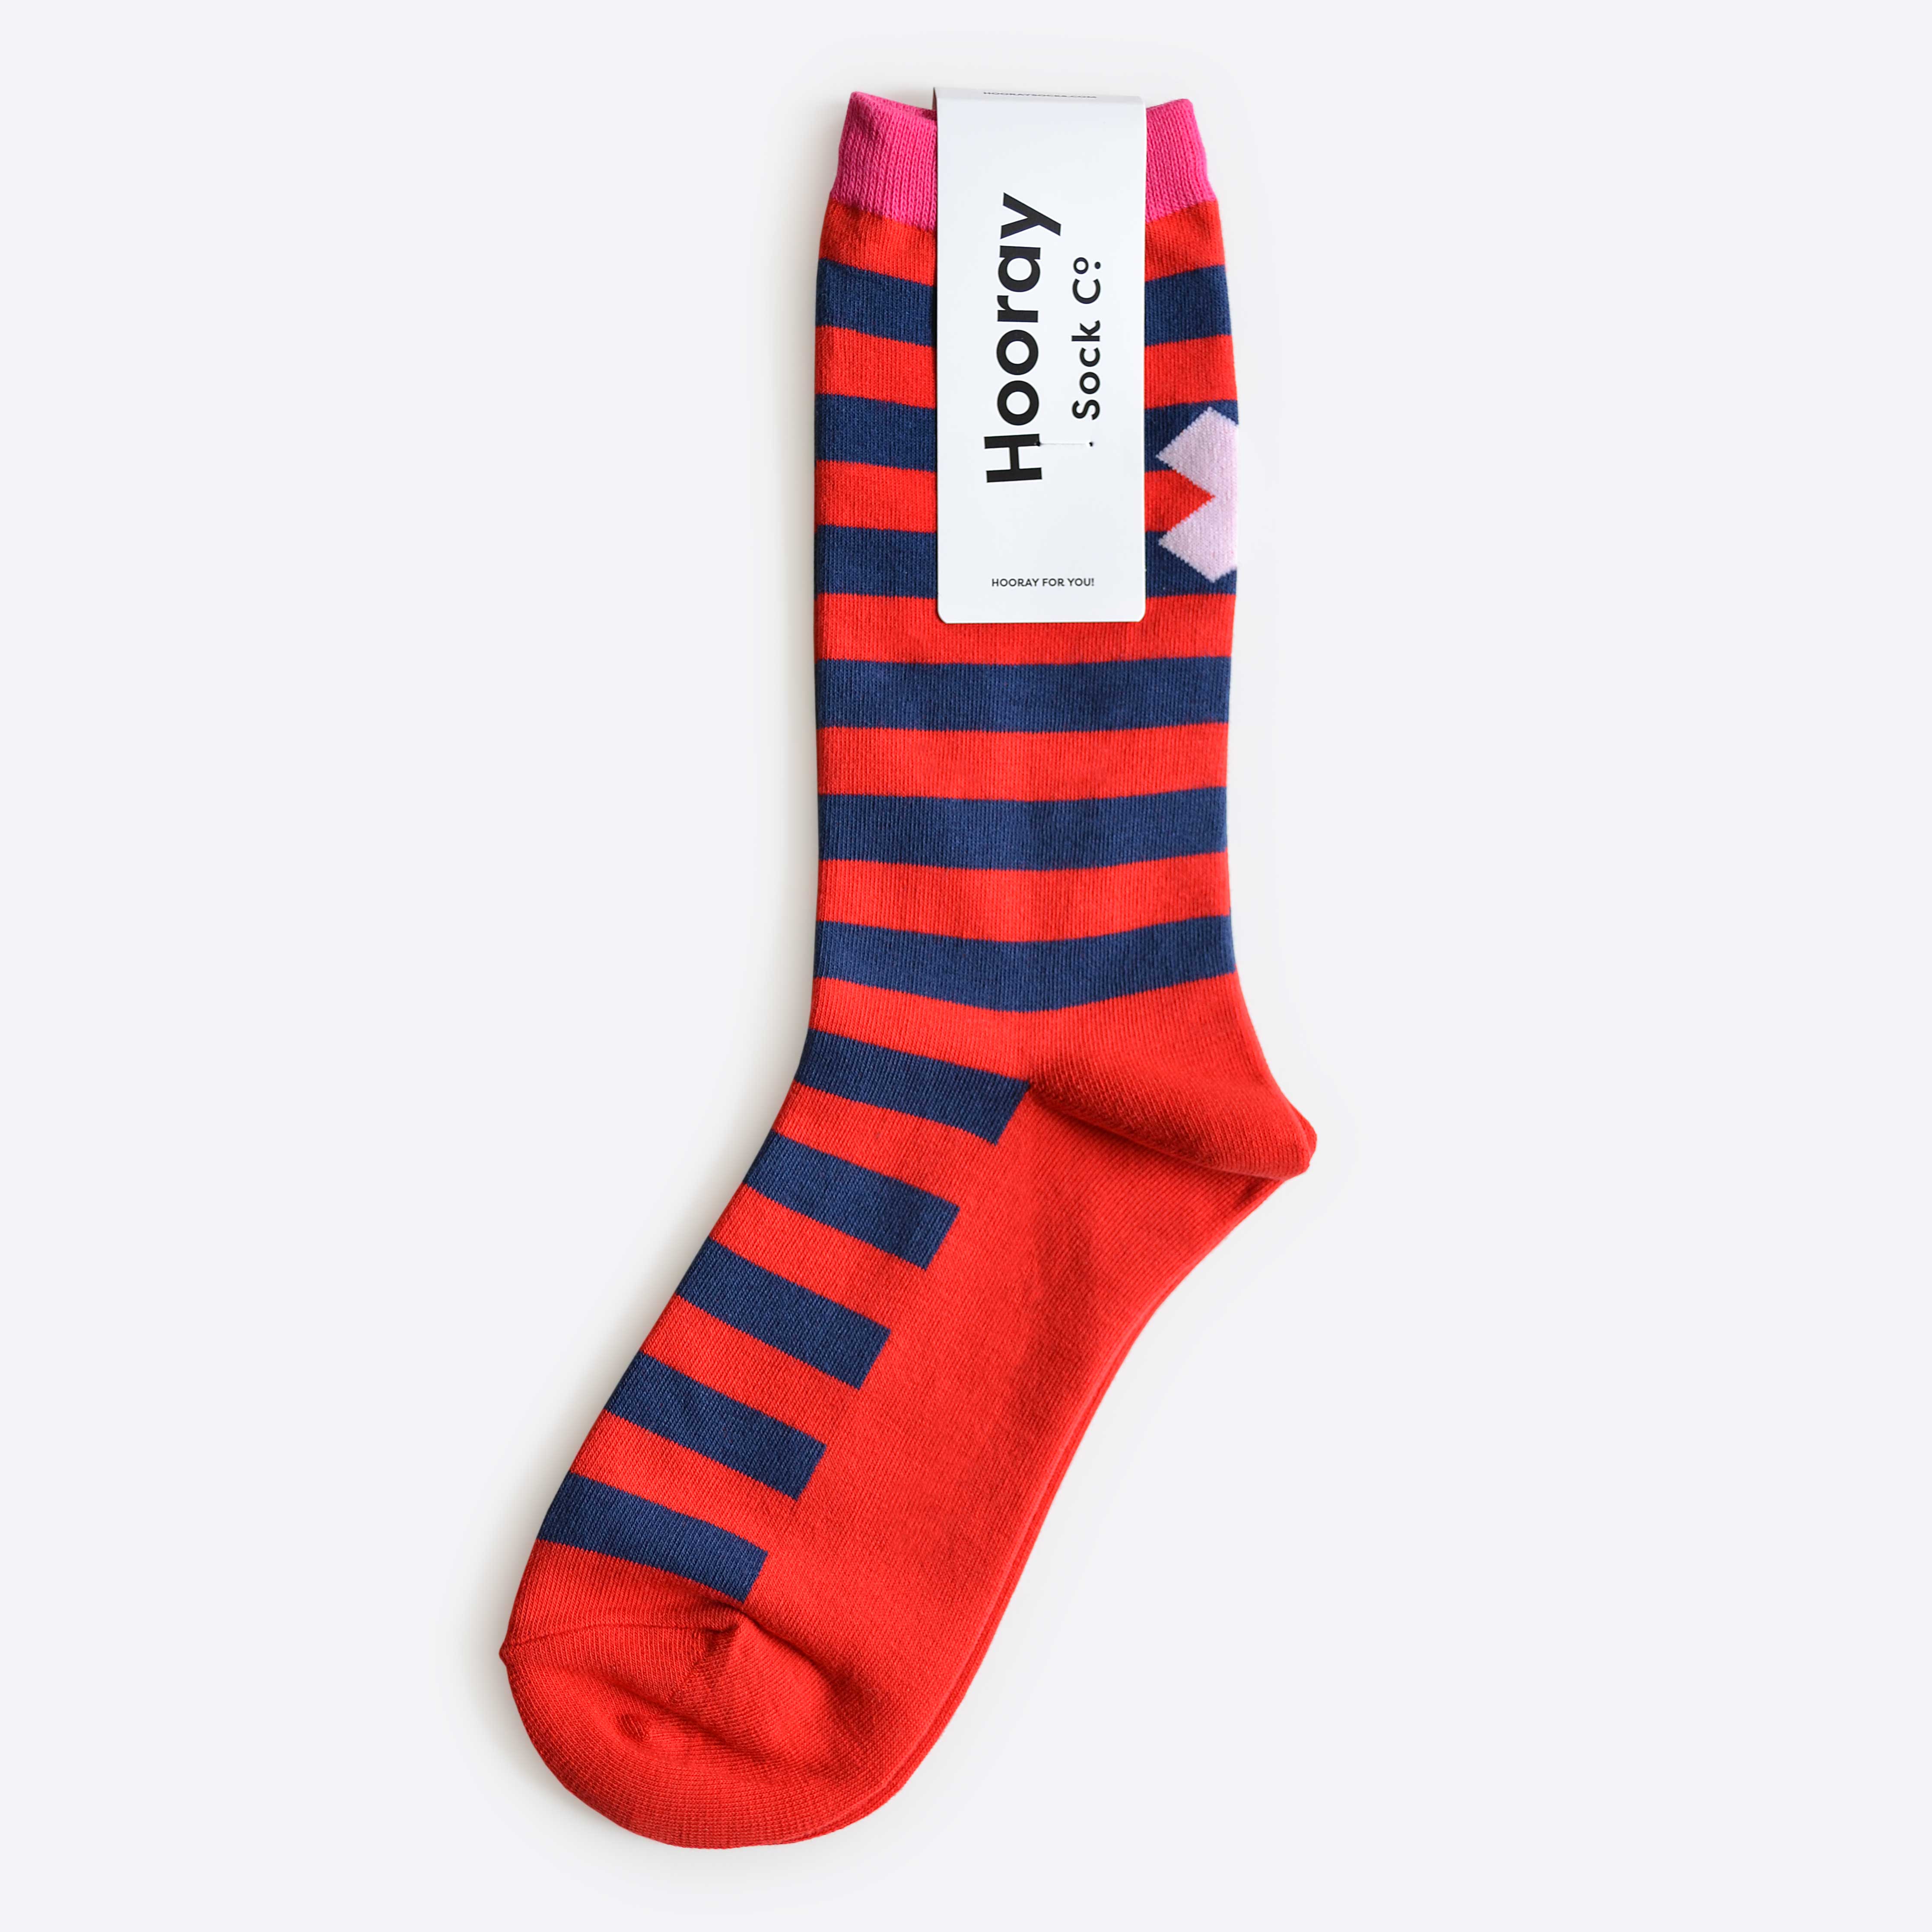 Hooray Sock Co. Taylor Red and Blue Stripe Crew Socks. Bold graphic 'X' on back. Crew length, 80% cotton, 20% spandex. Sizes: Large (US men’s 8-12), Small (US women's 4-10). 